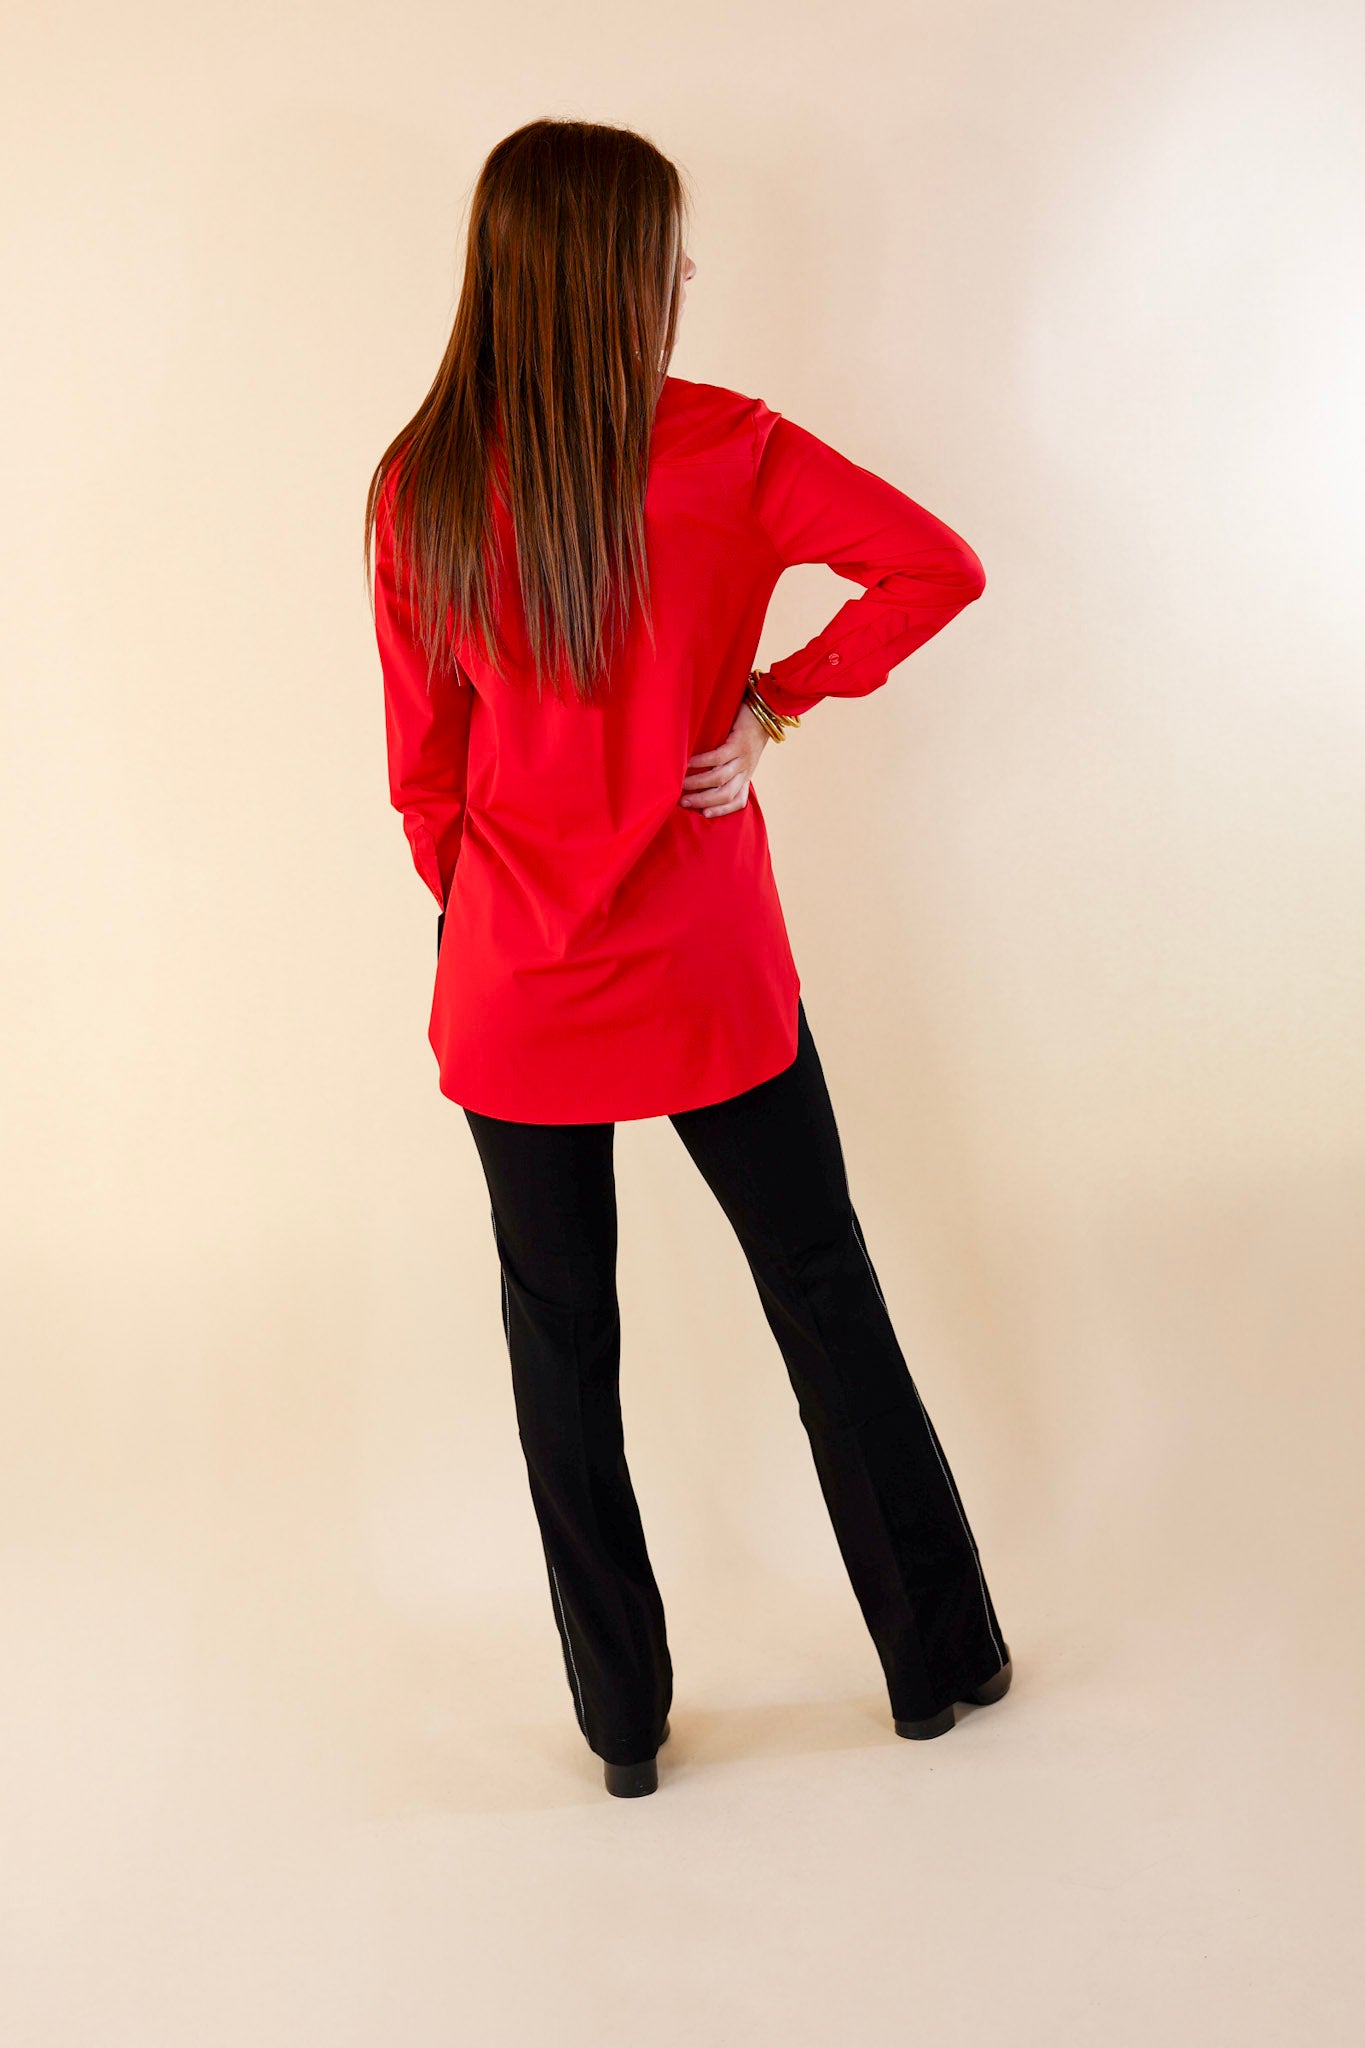 Lyssé | Schiffer Button Down Dress Shirt in Red - Giddy Up Glamour Boutique